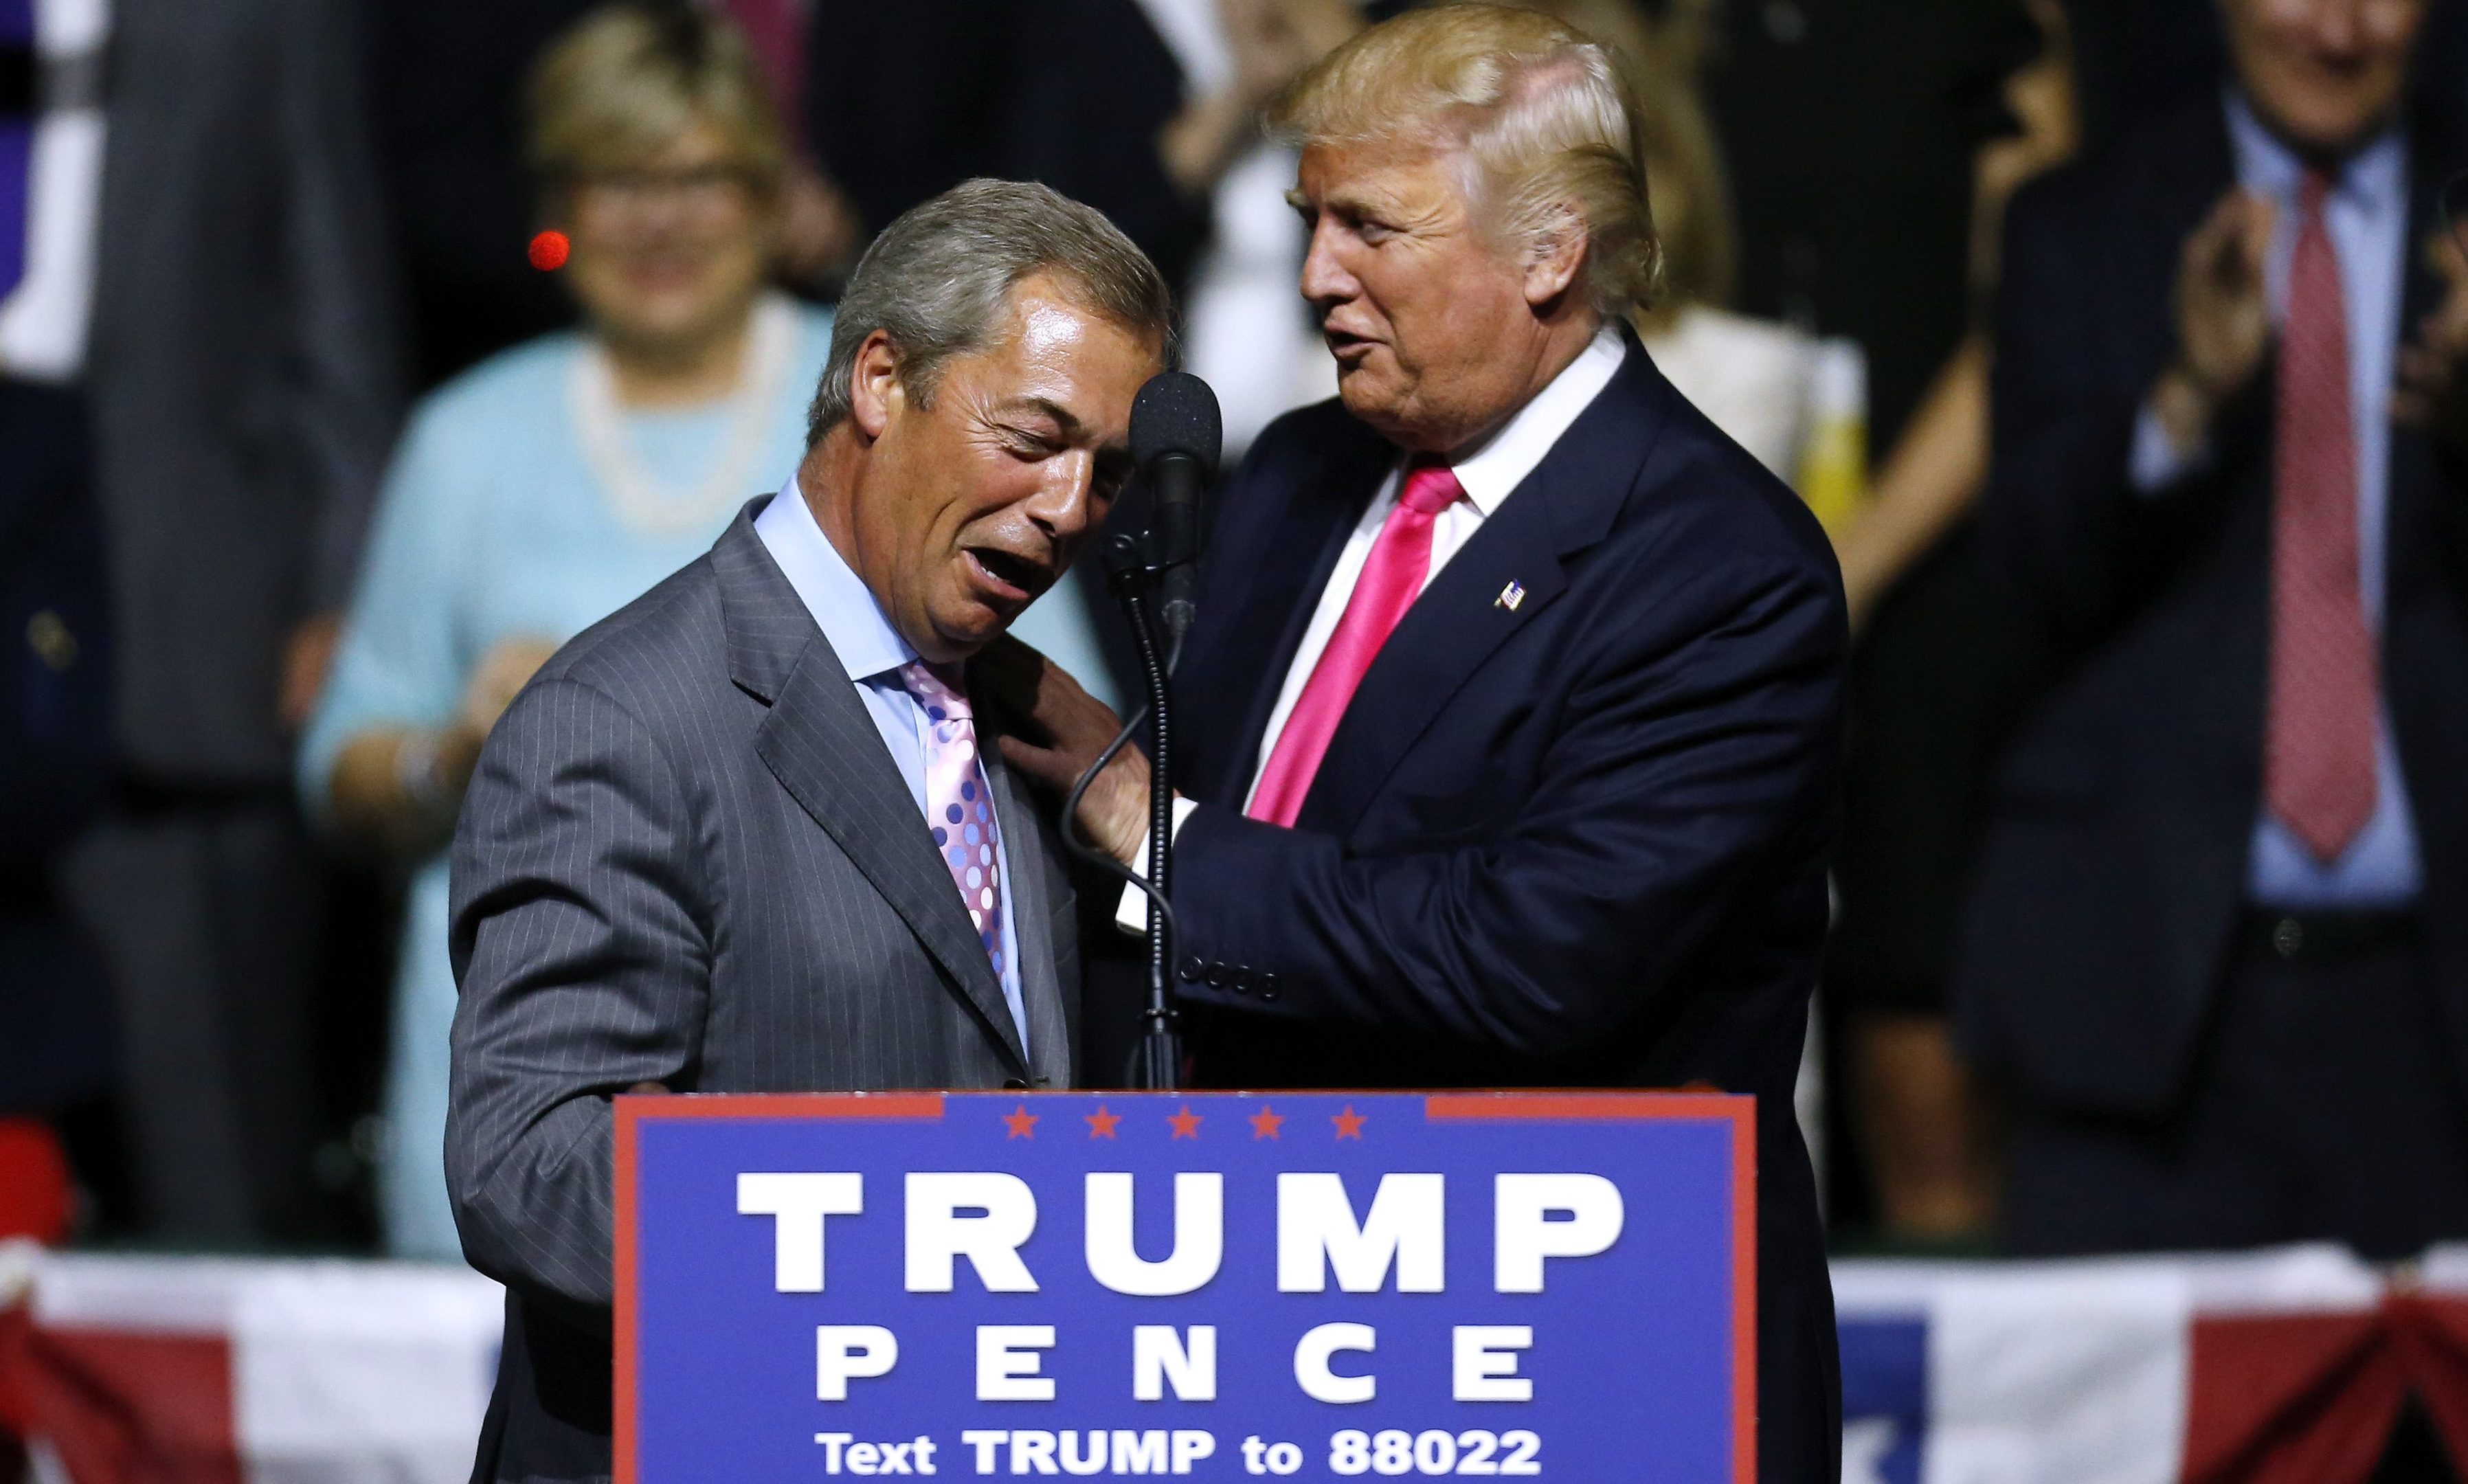 Nigel Farage spoke at a Donald Trump rally during campaigning.